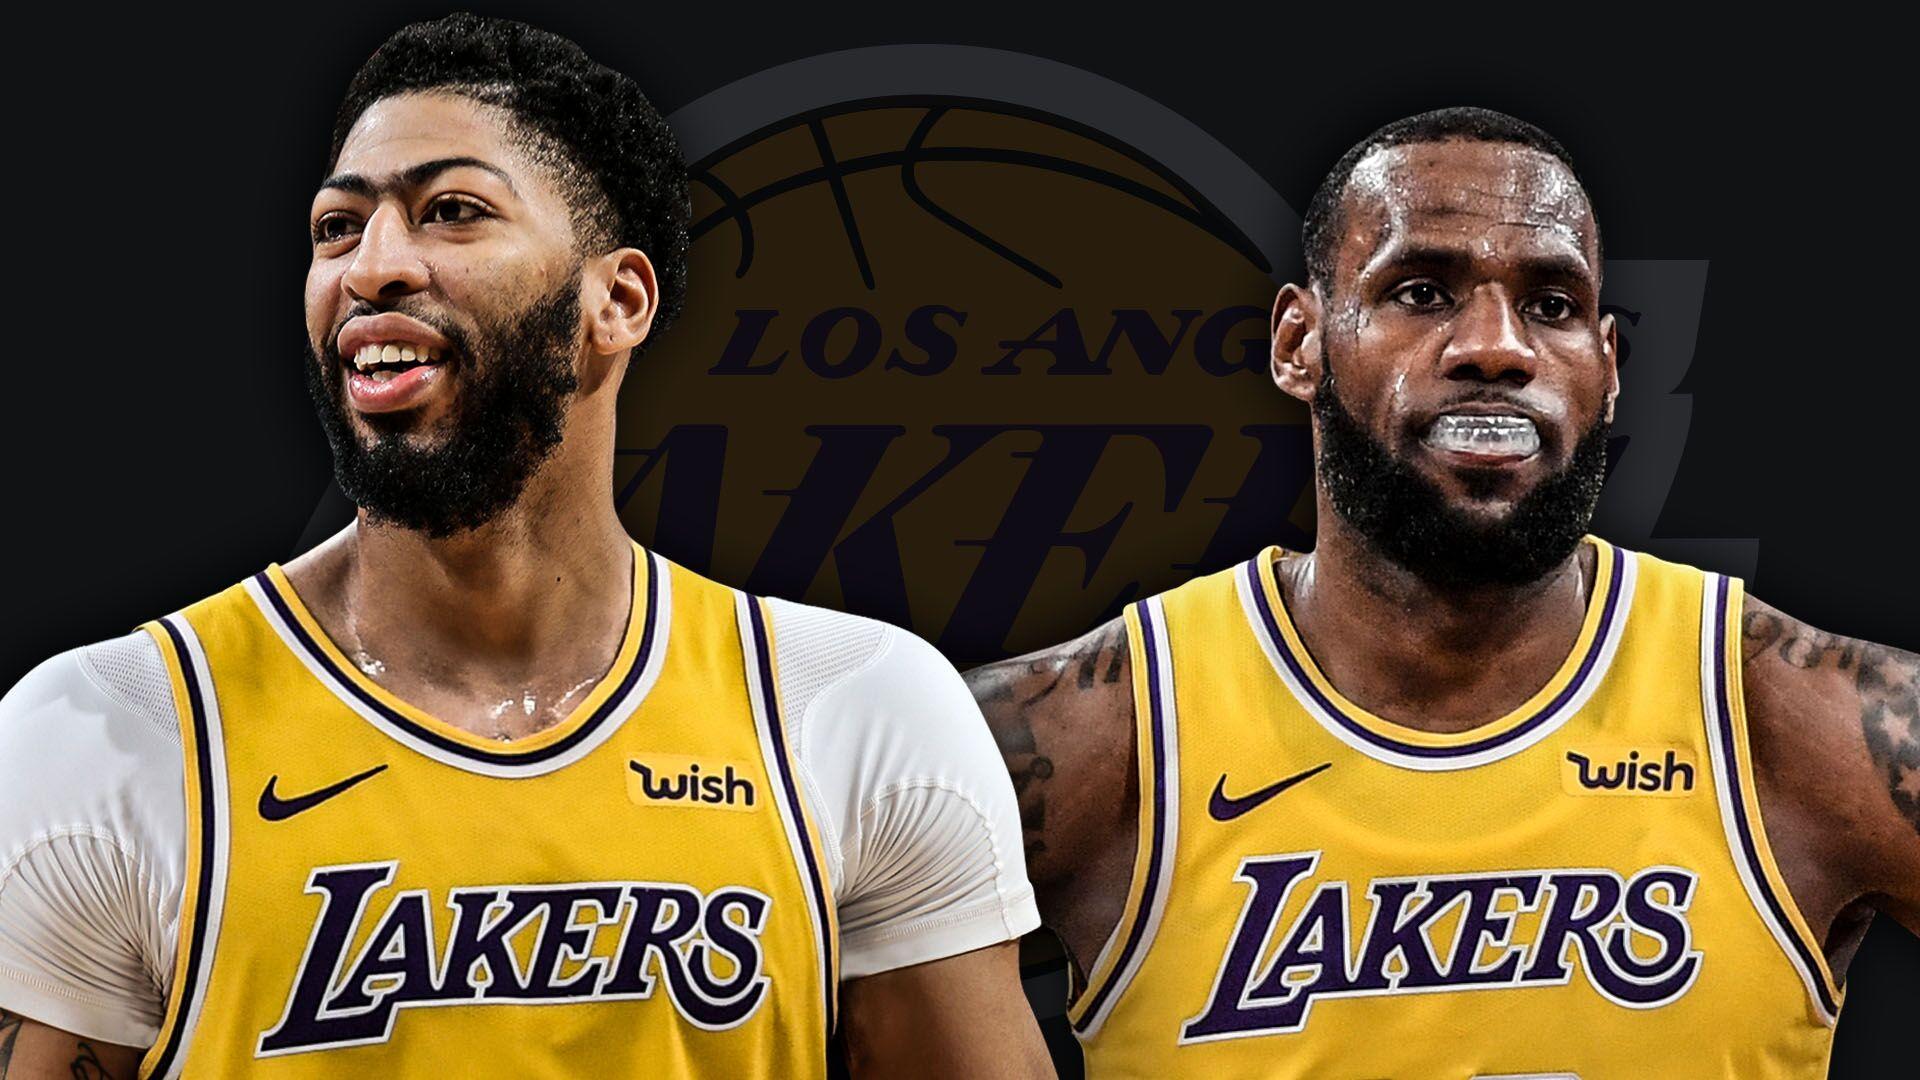 lebron james and anthony davis wallpapers wallpaper cave lebron james and anthony davis